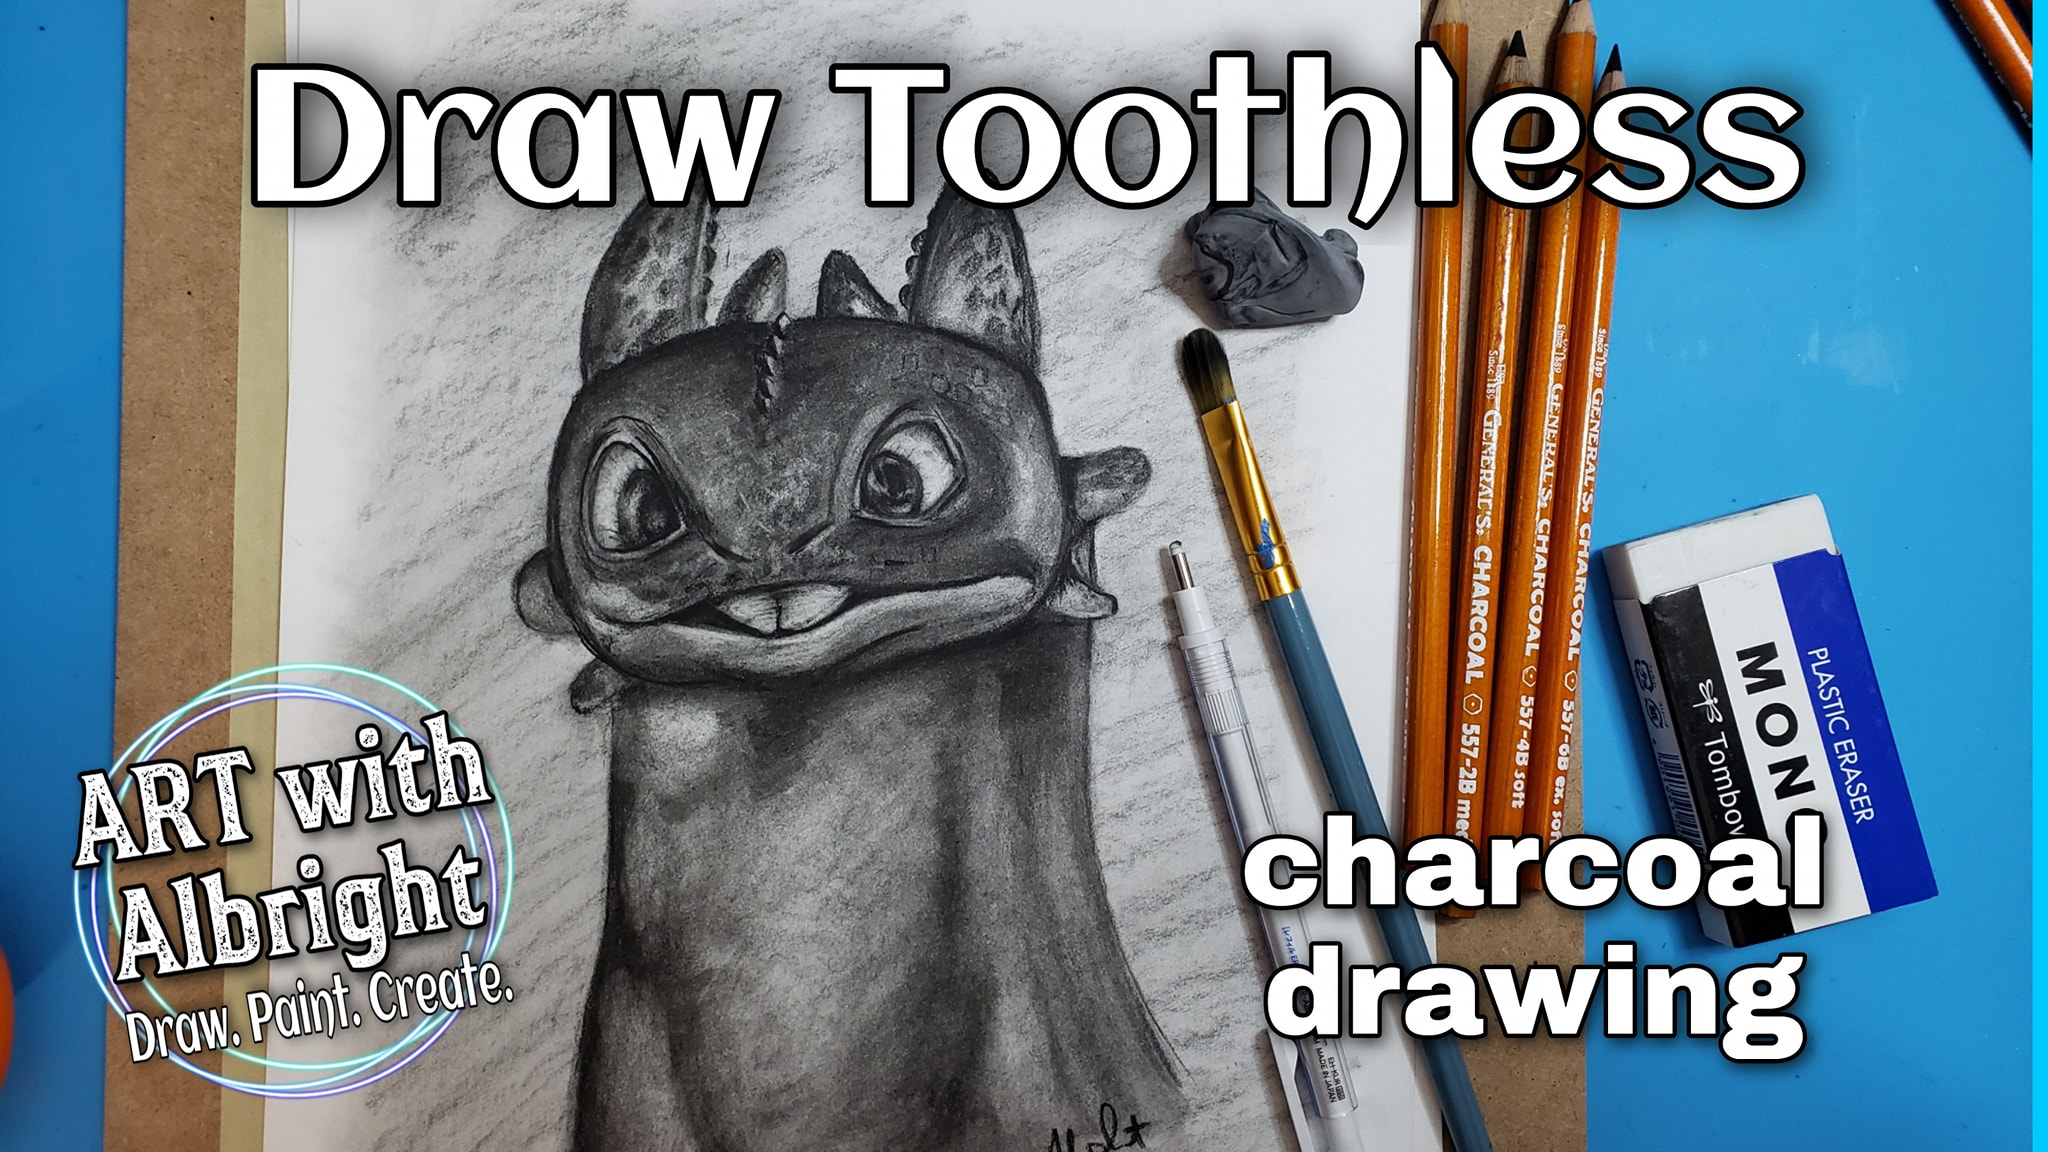 Details 179+ toothless dragon sketch latest